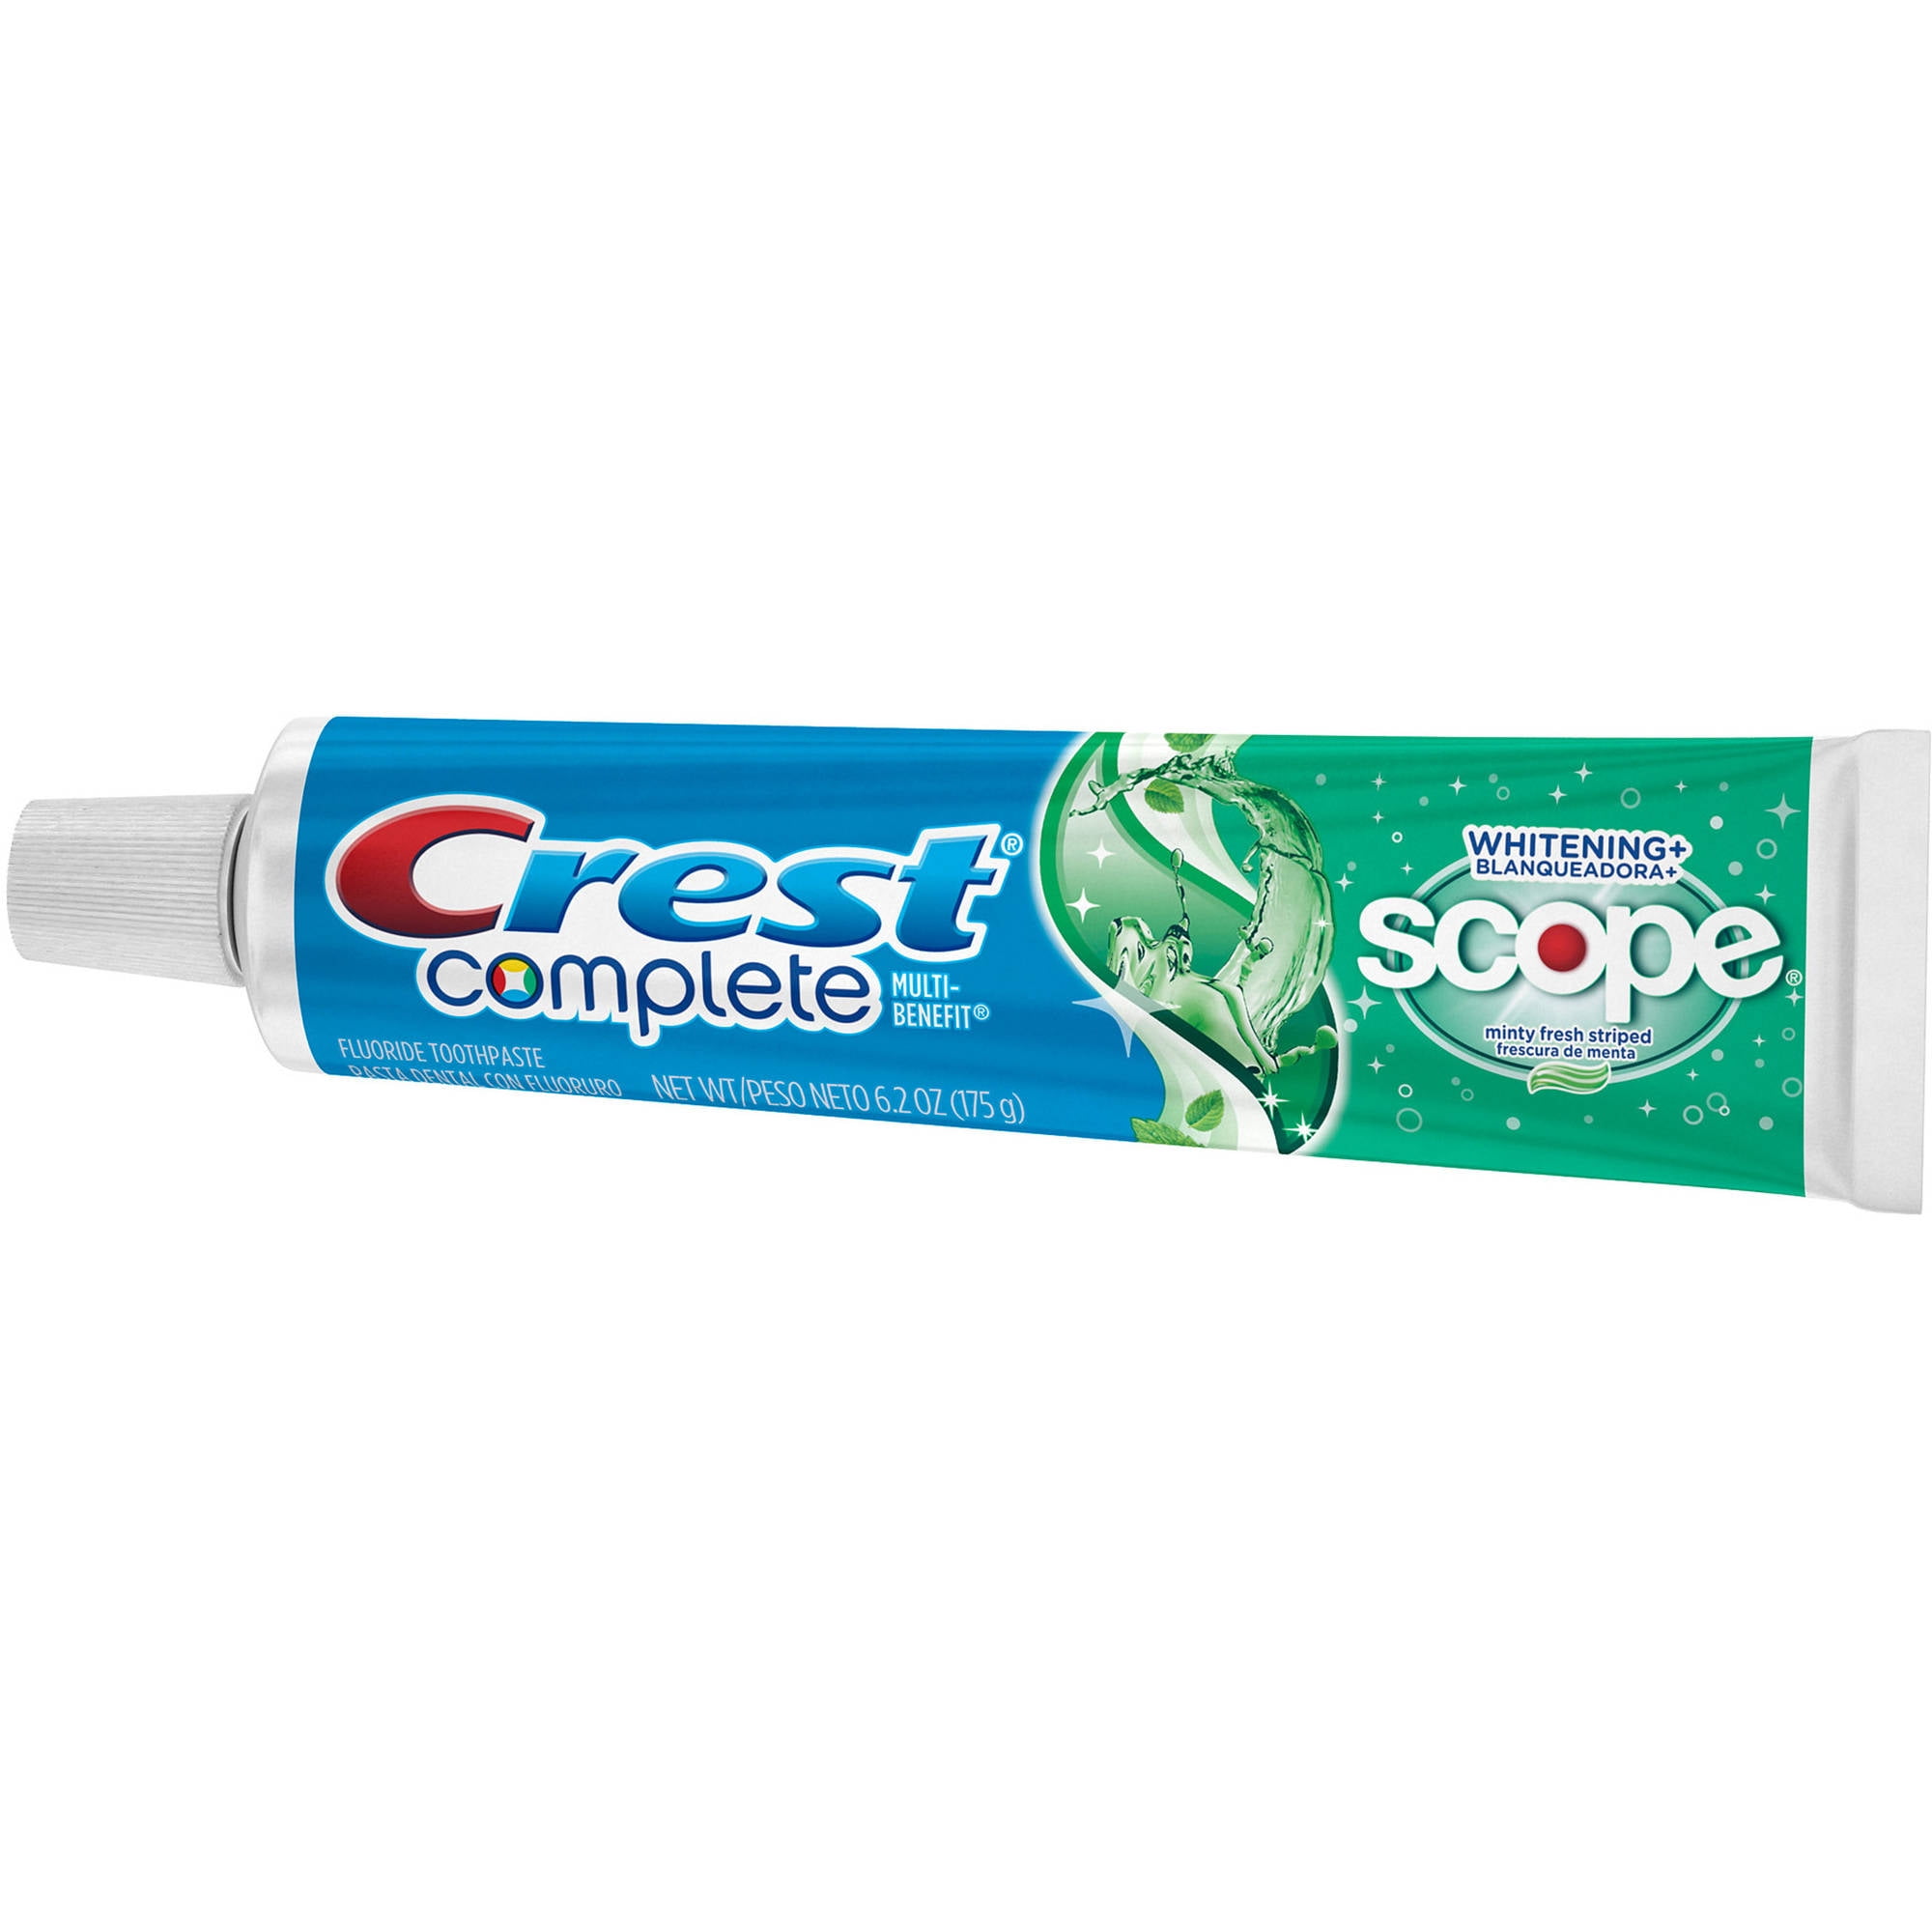 Crest Complete Whitening + Scope Minty Fresh Striped Toothpaste ...